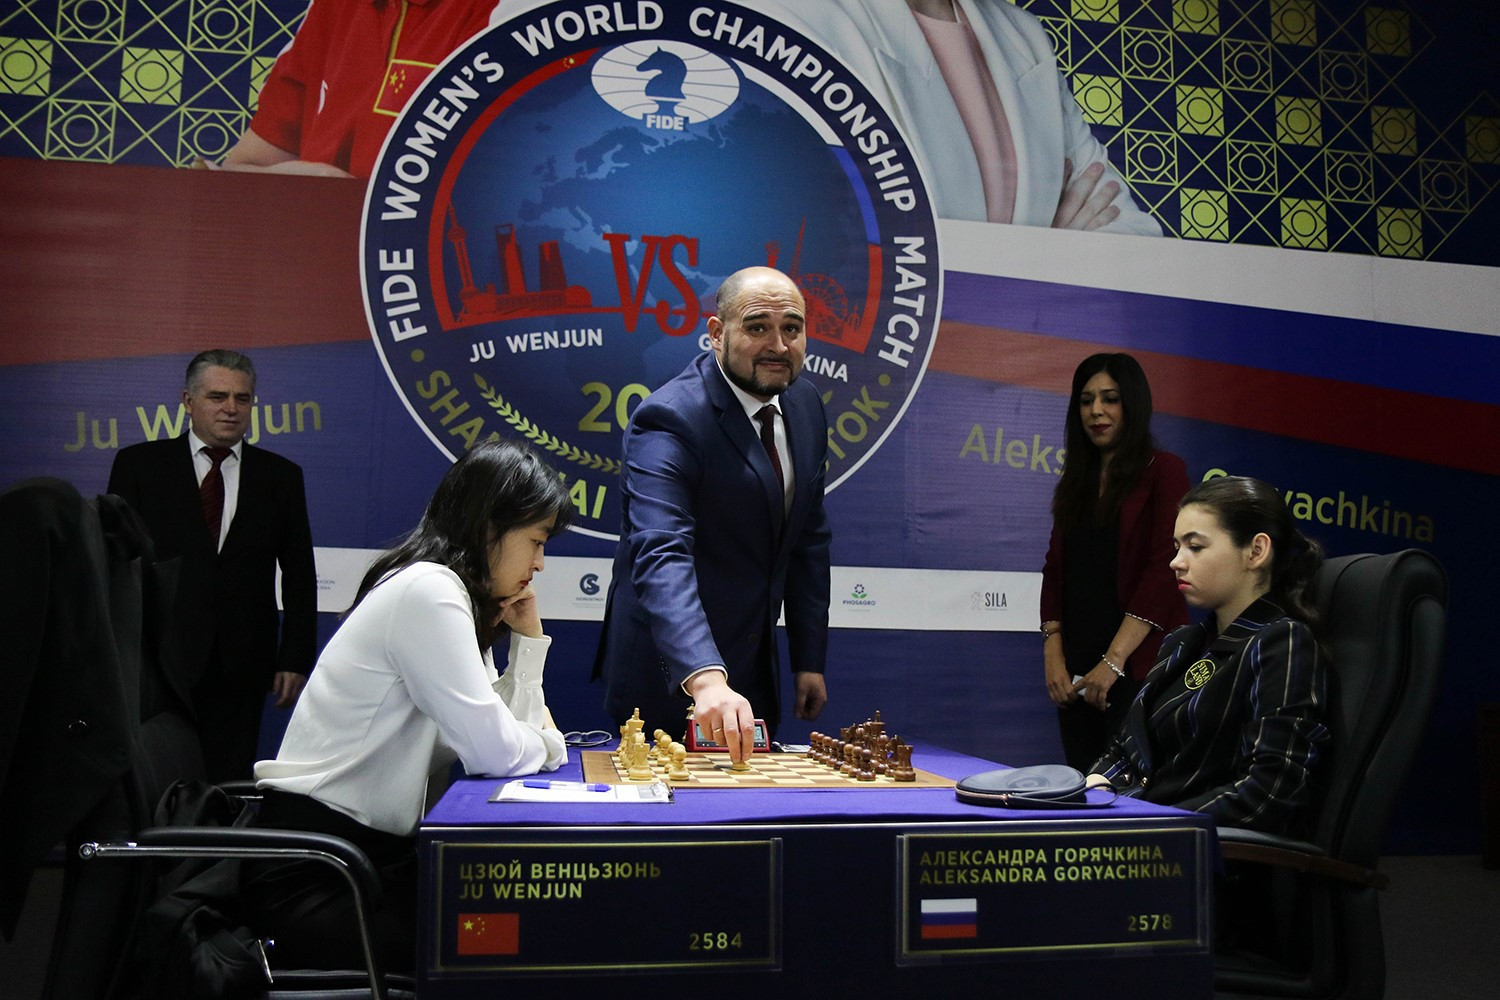 The penultimate game was quickly concluded as a draw ©FIDE